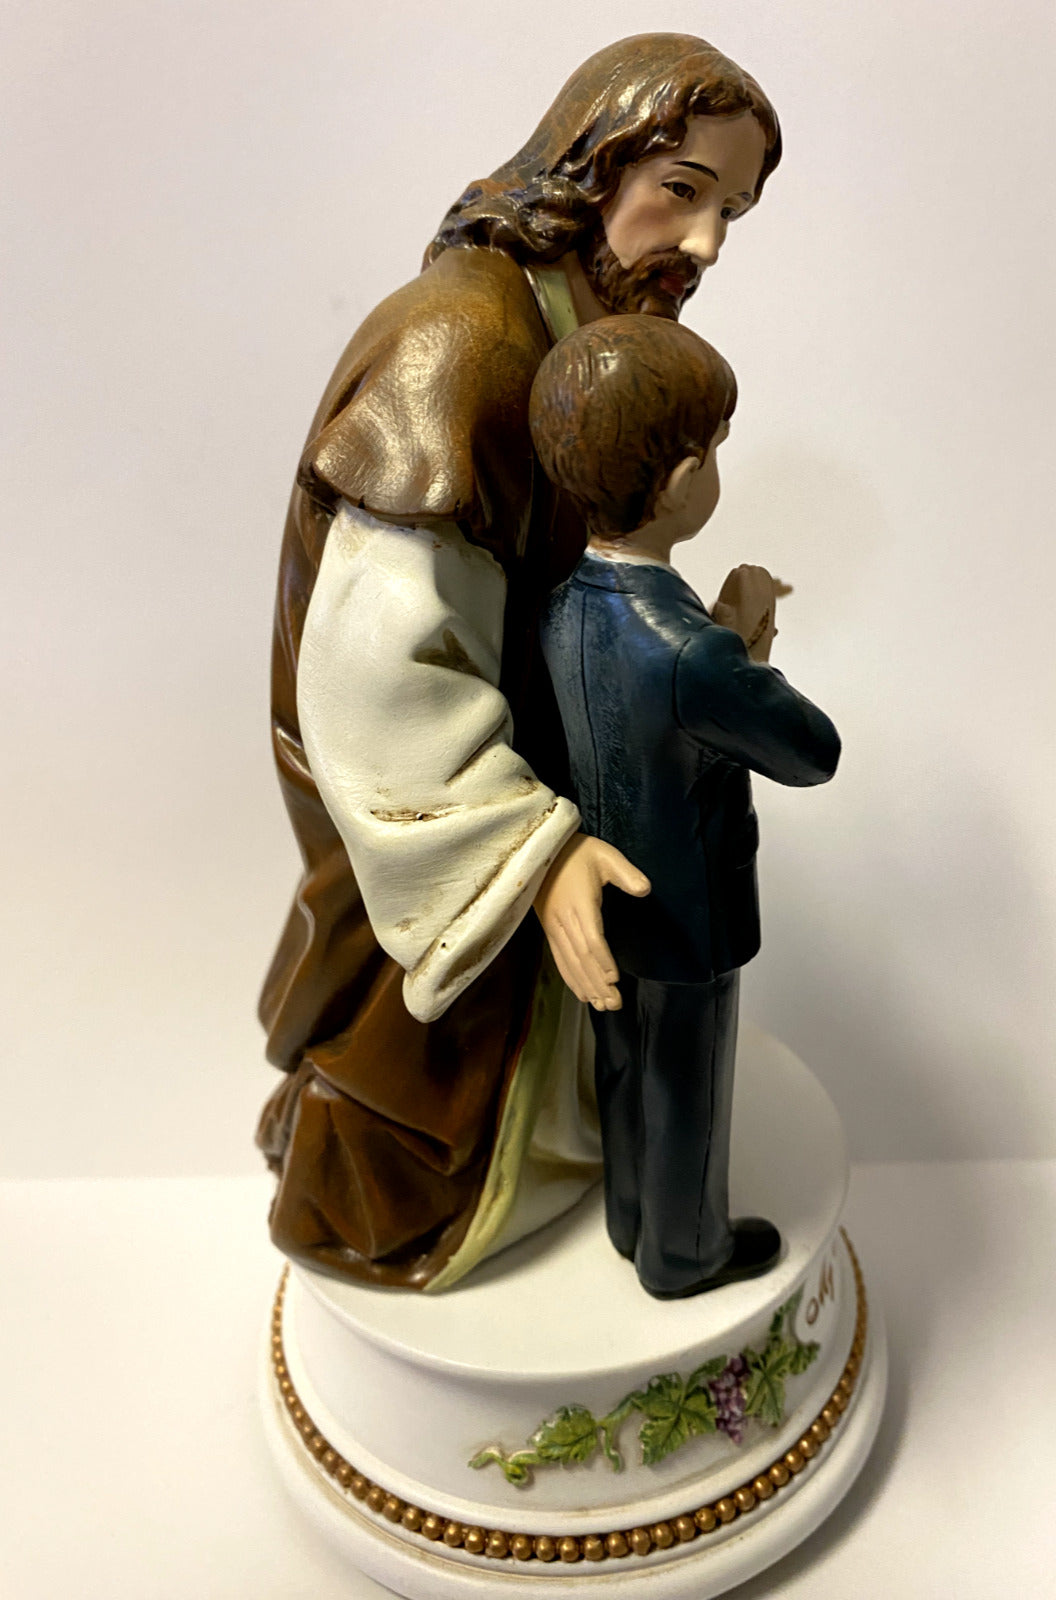 Jesus with Boy Communion Musical Figurine, 7.25"  New - Bob and Penny Lord